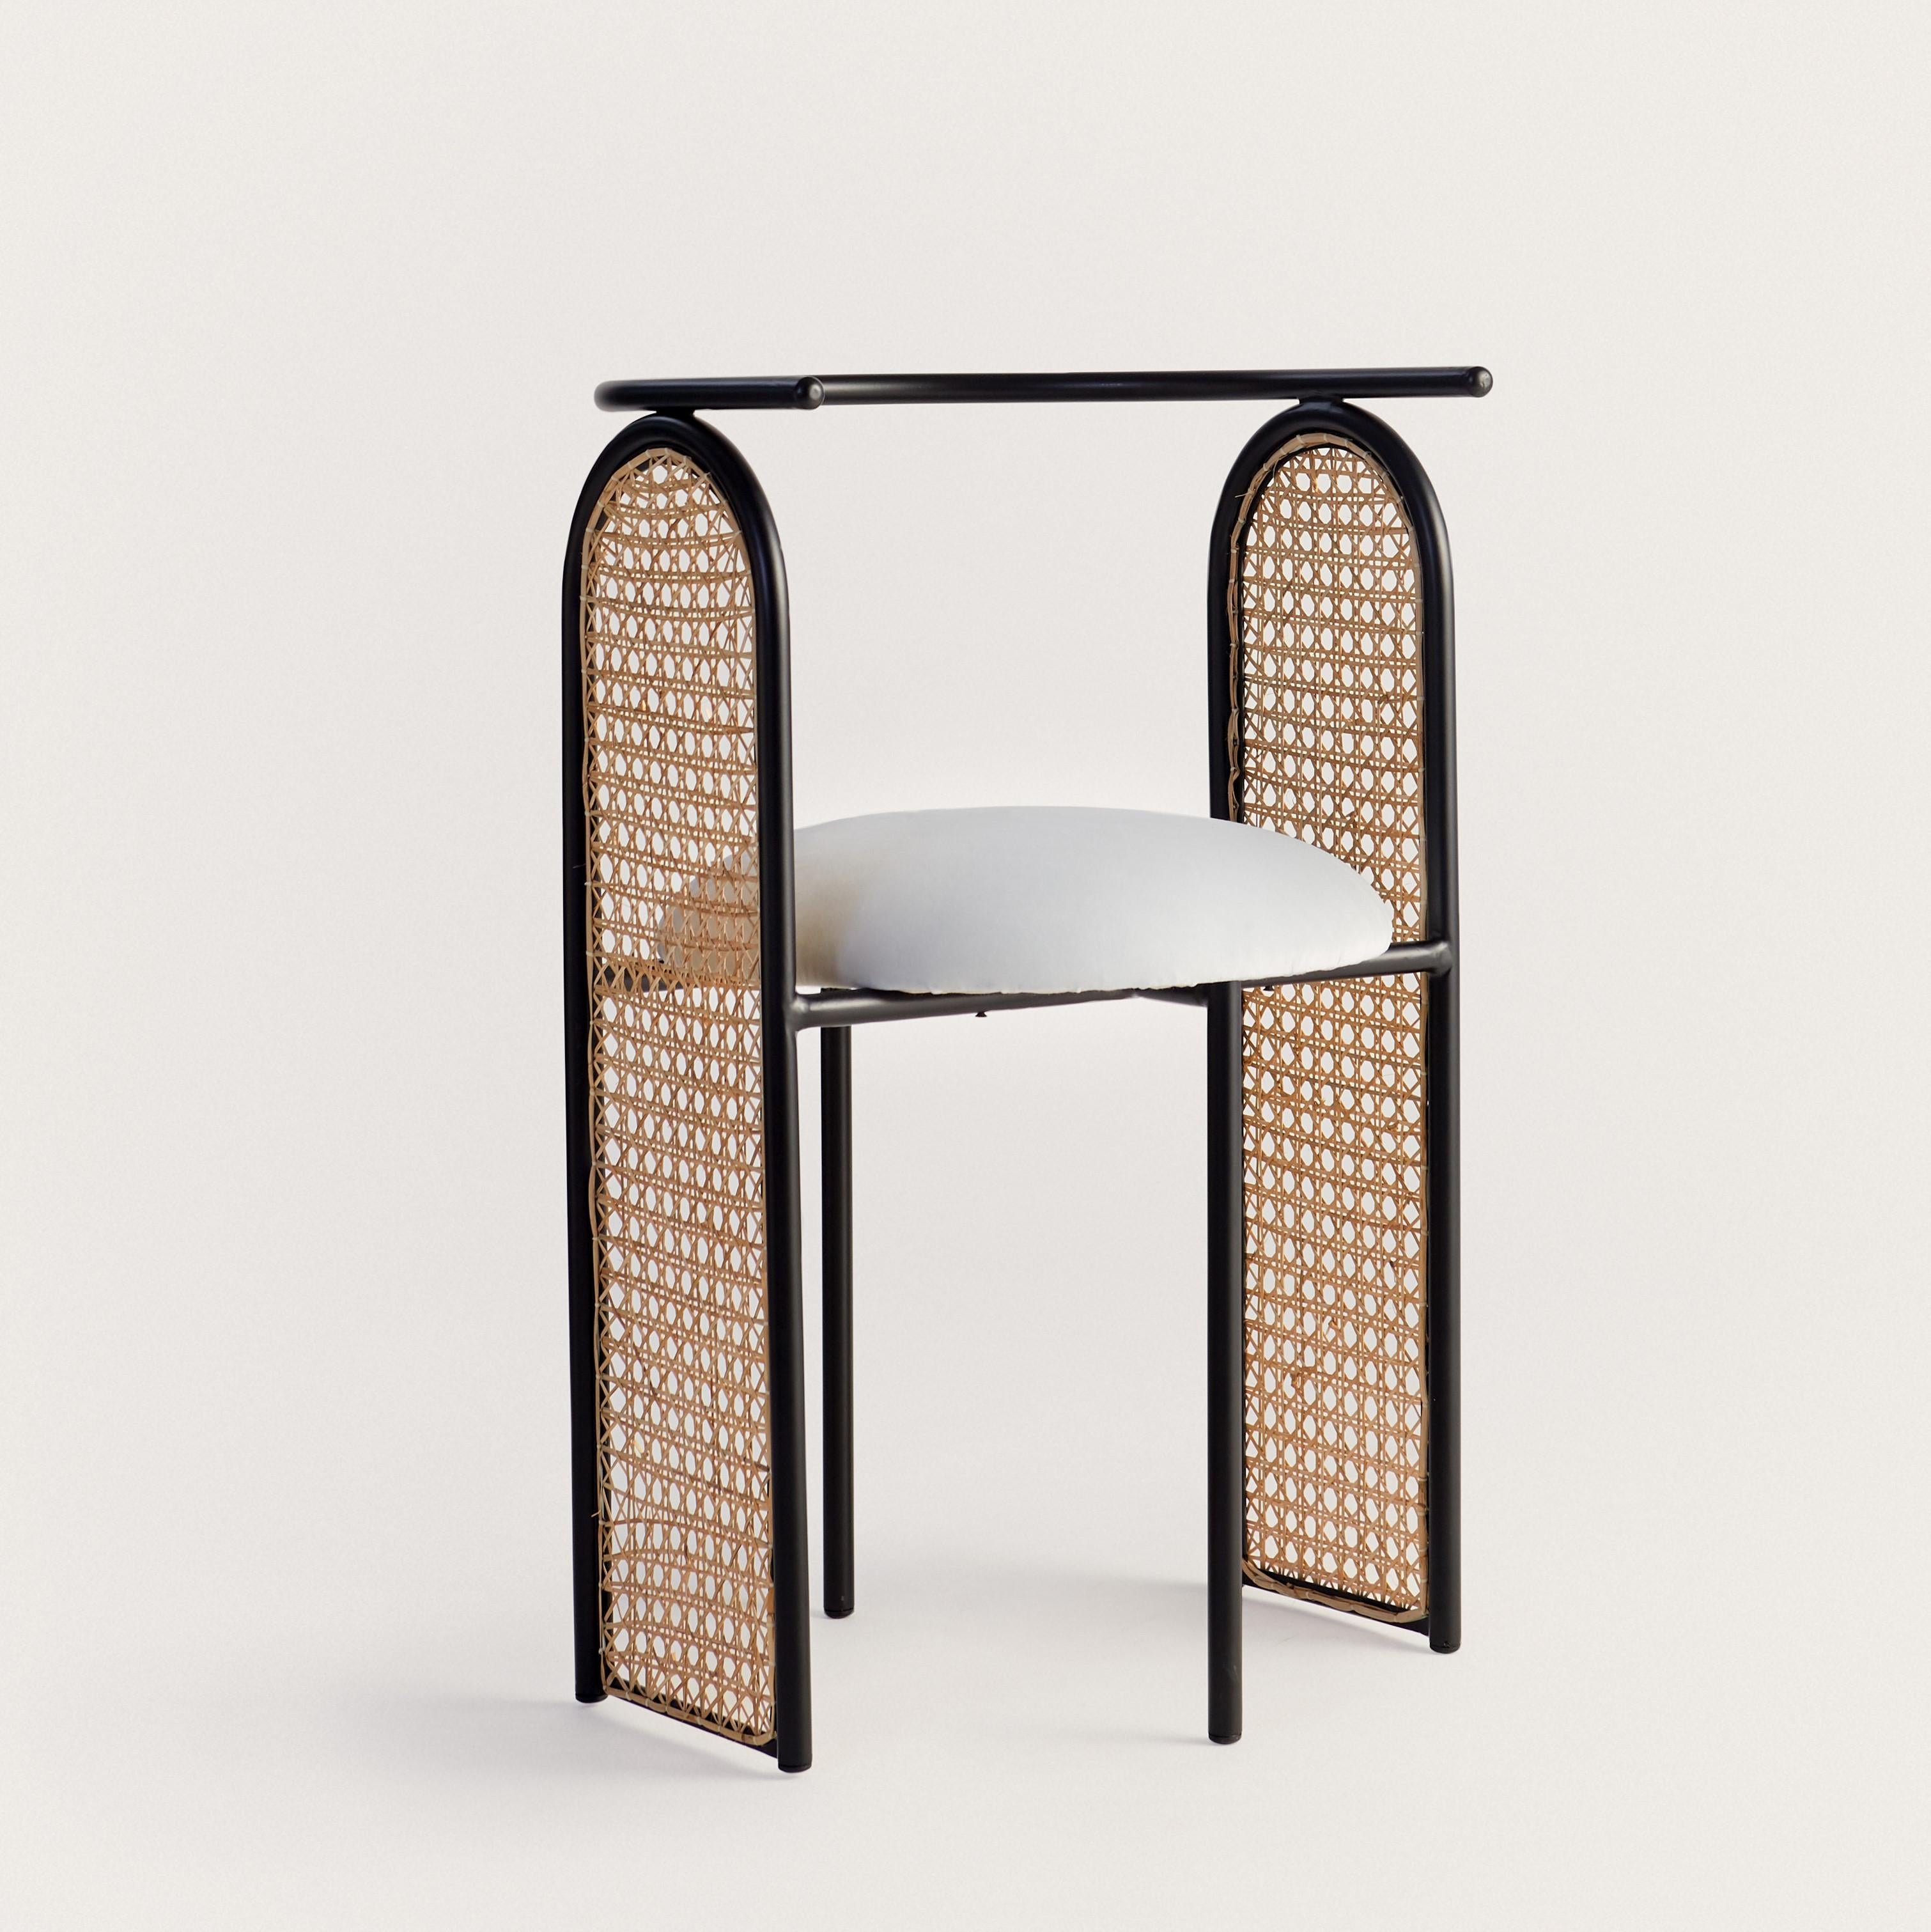 Unique arco chair by Hatsu
Dimensions: D 48 x W 48 x H 74 cm 
Materials: Uphostered seating on powder coated steel frame

Hatsu is a design studio based in Mumbai that creates modern lighting that are unique and immediately recognisable. We started